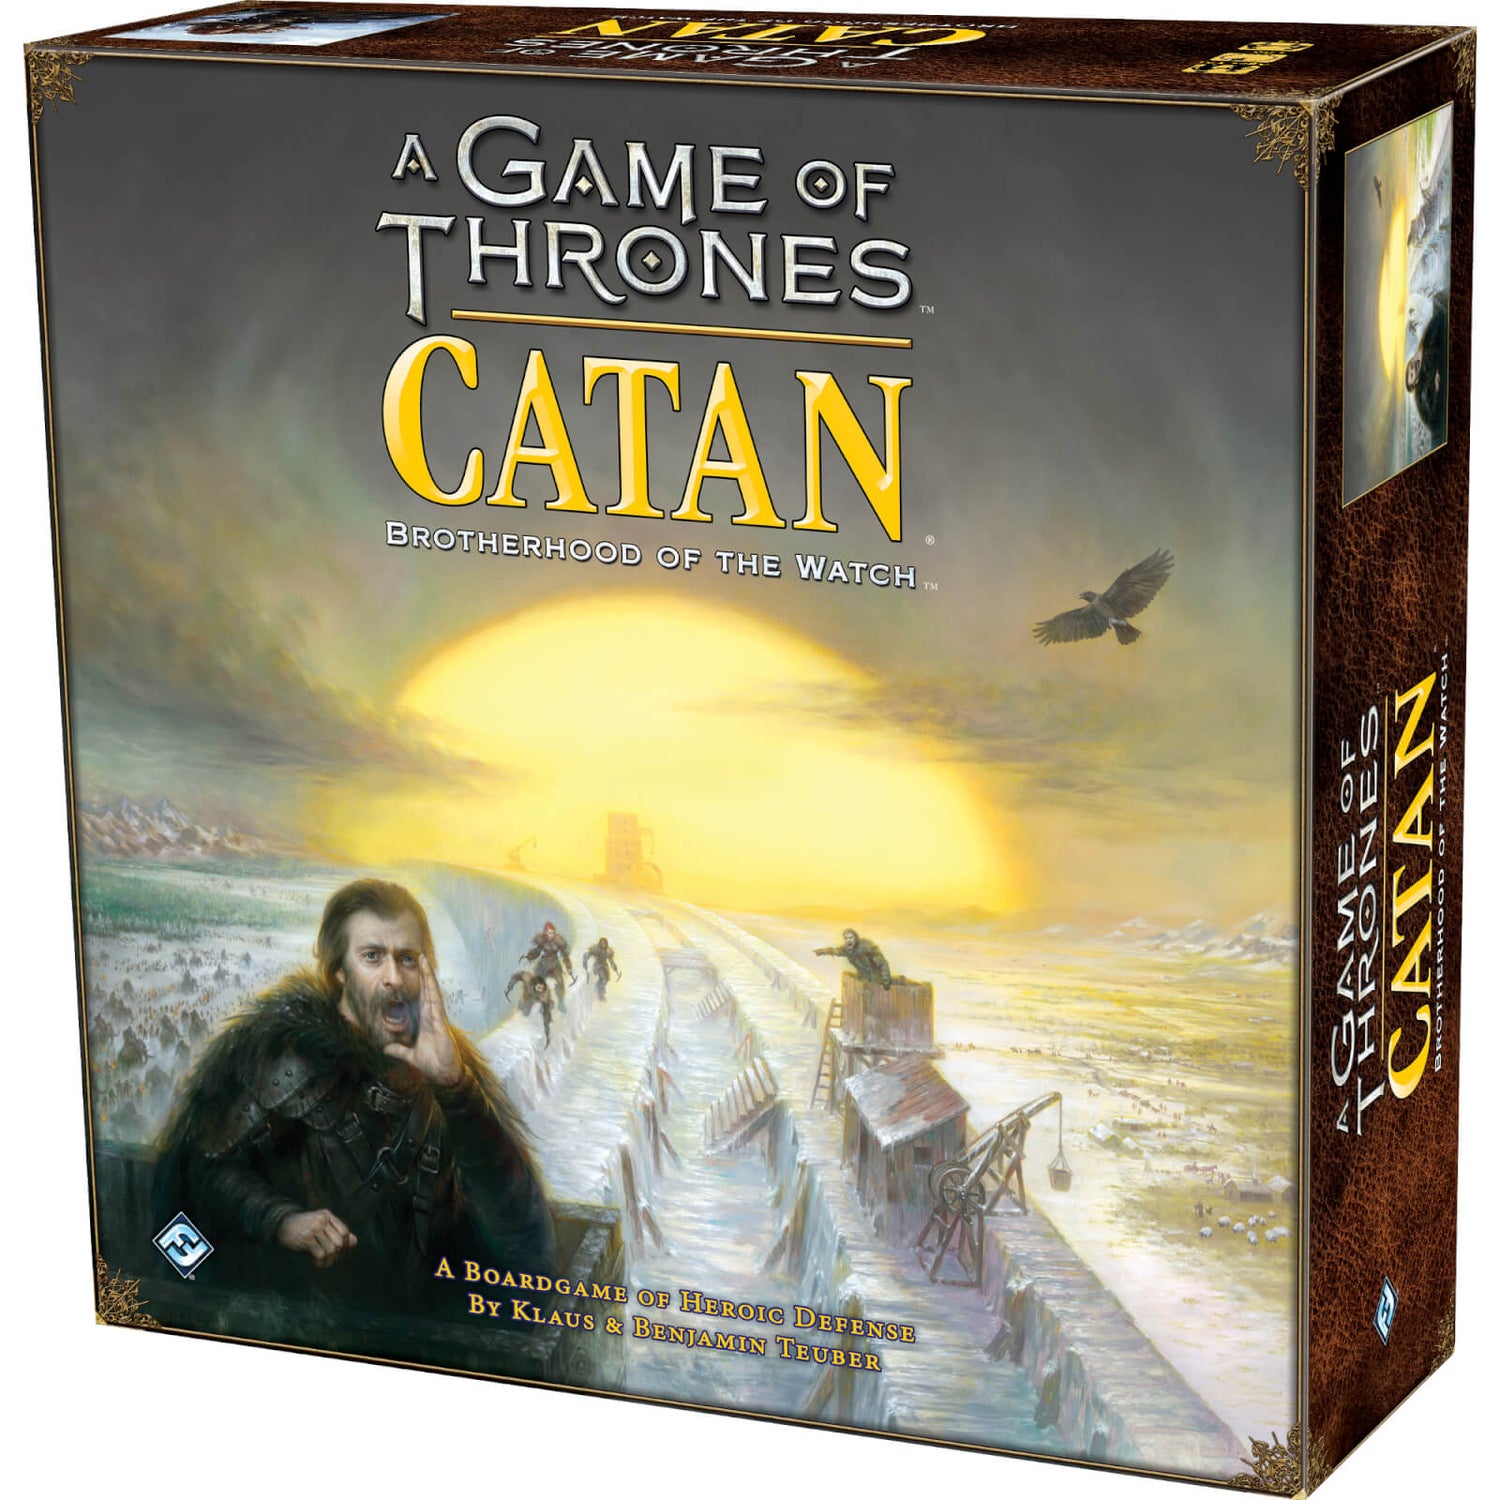 A Game of Thrones Catan : Brotherhood of the Watch